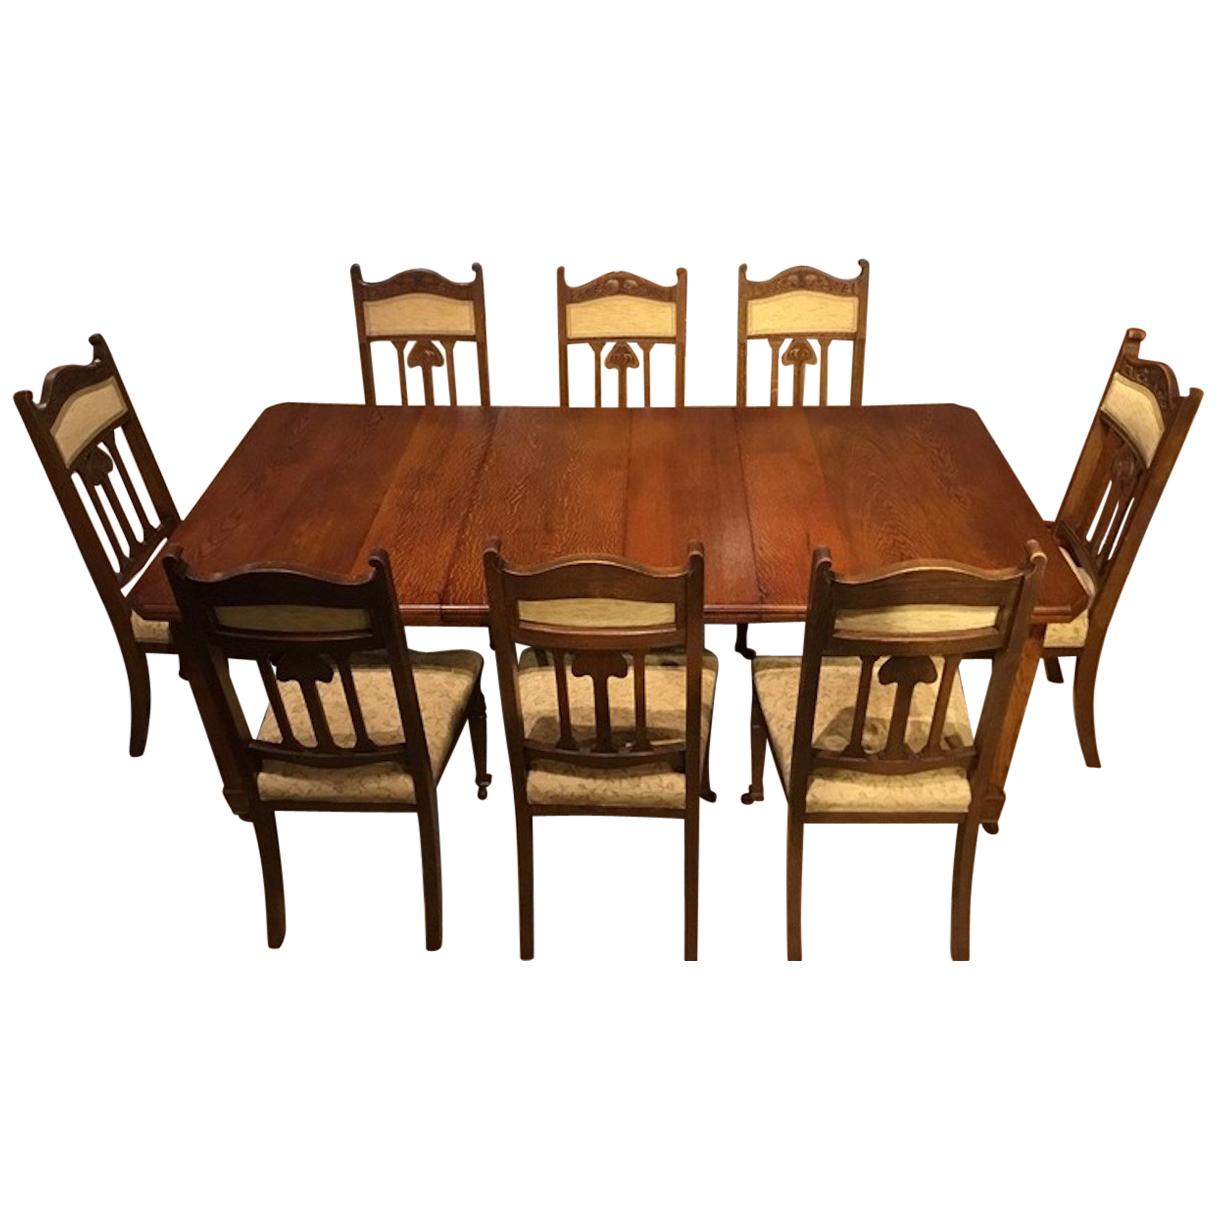 Oak Arts & Crafts Period Extending Dining Table and 8 Chairs